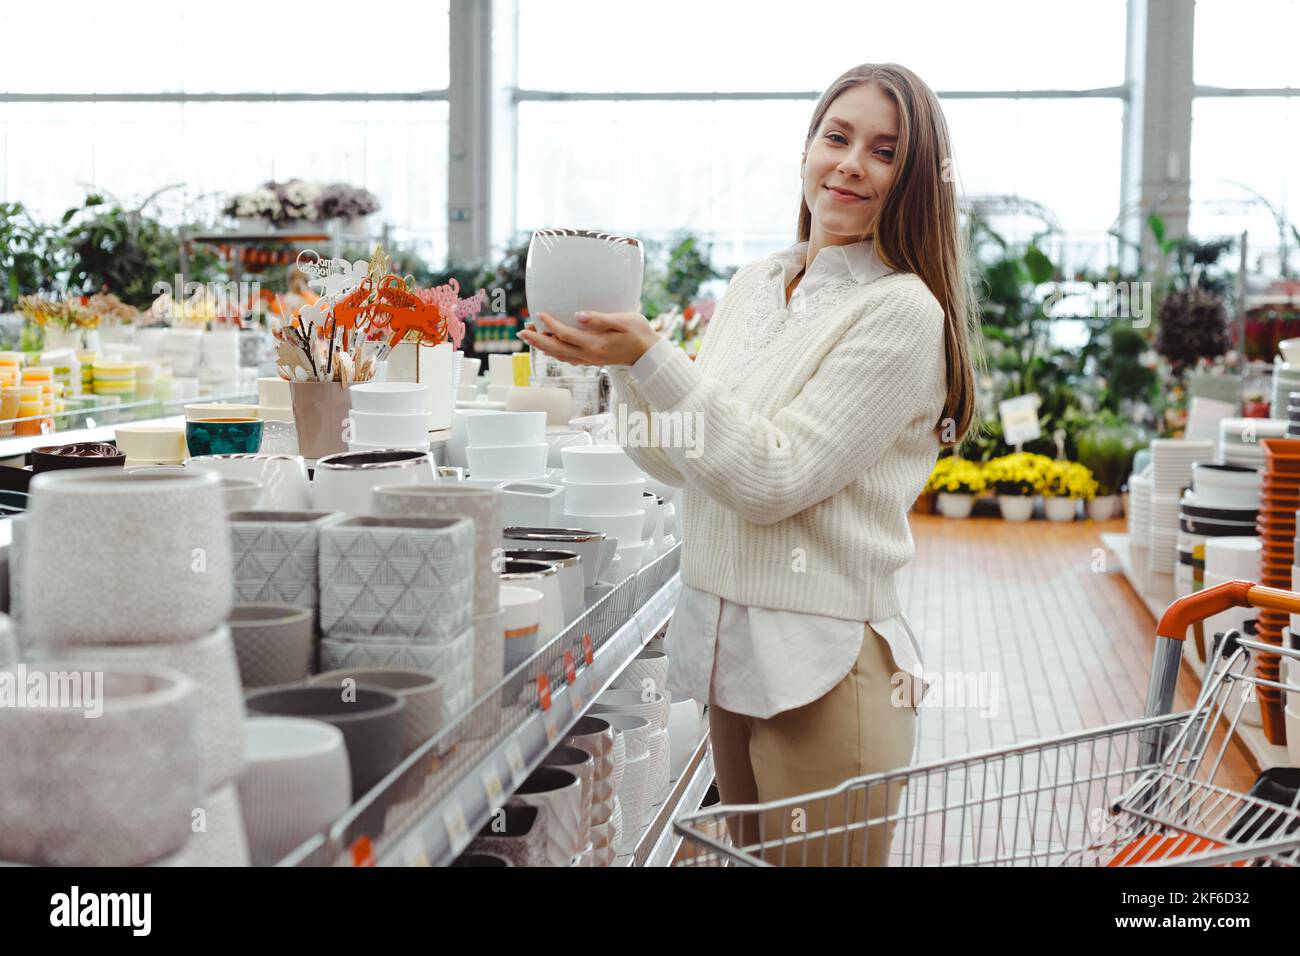 A woman chooses a pot for home plants in a greenhouse store, hardware store, shopping for home and interior goods. Stock Photo